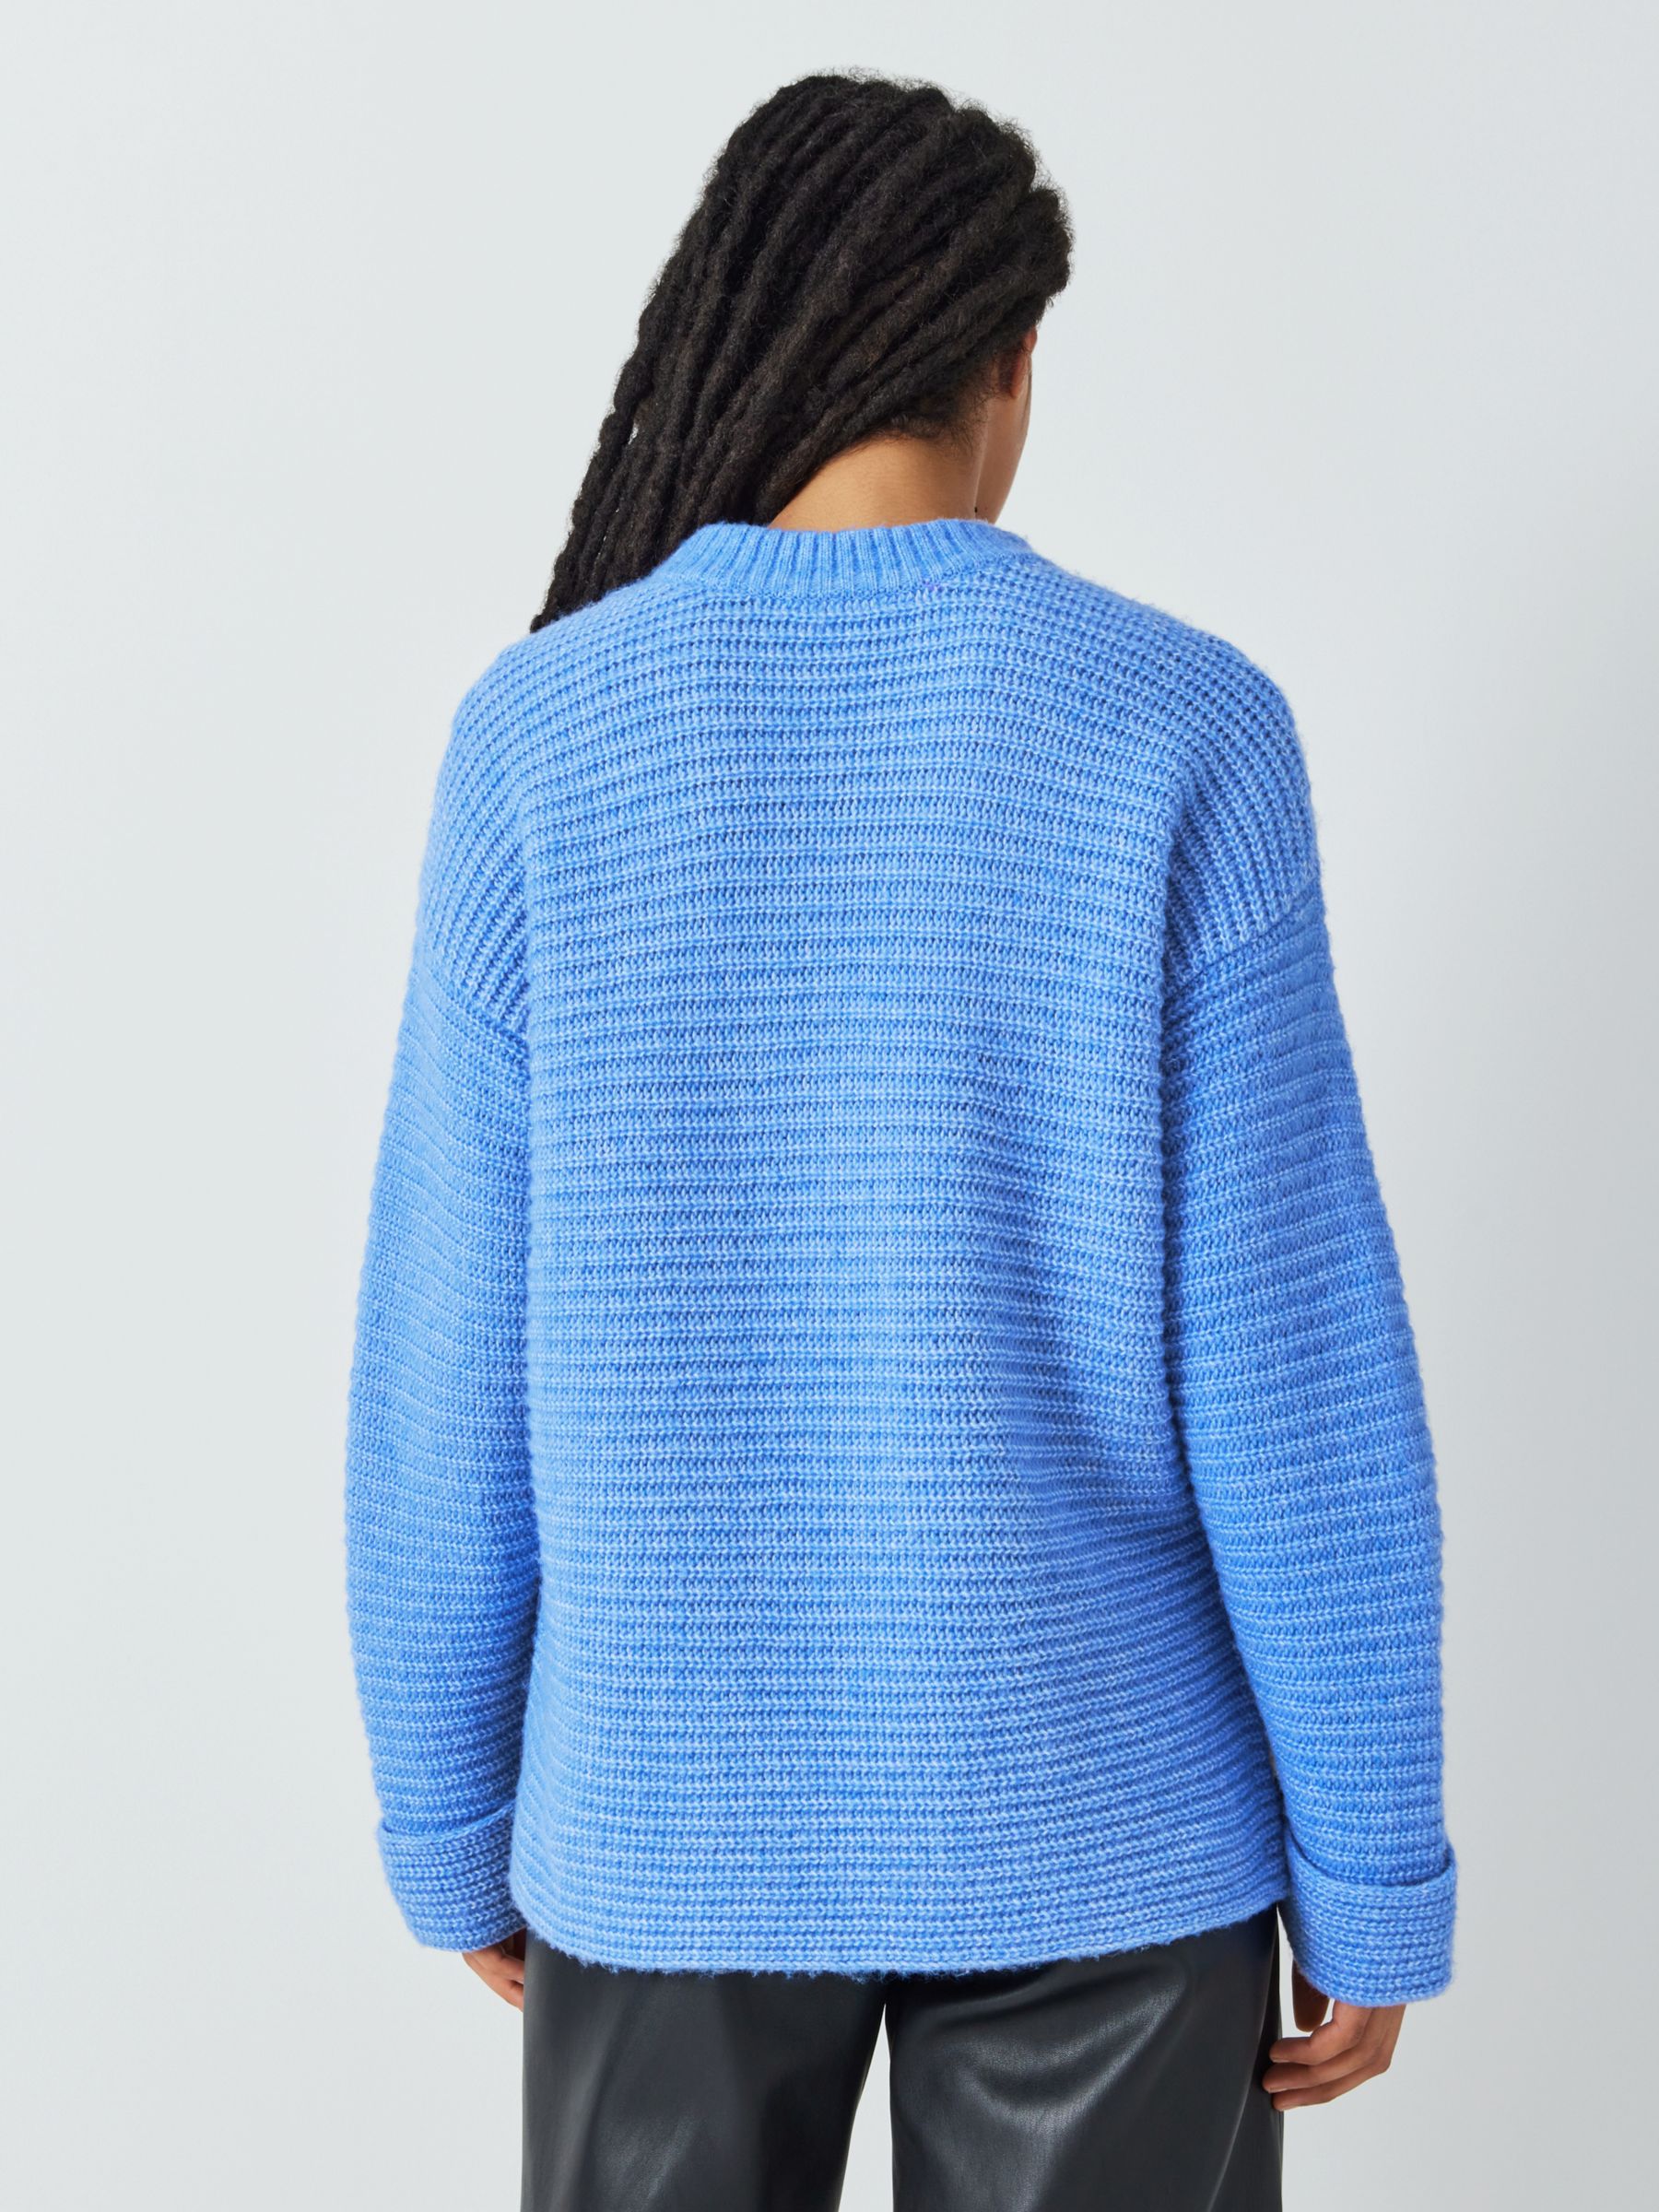 John Lewis ANYDAY Textured Knit Turned Up Cuff Jumper, Blue